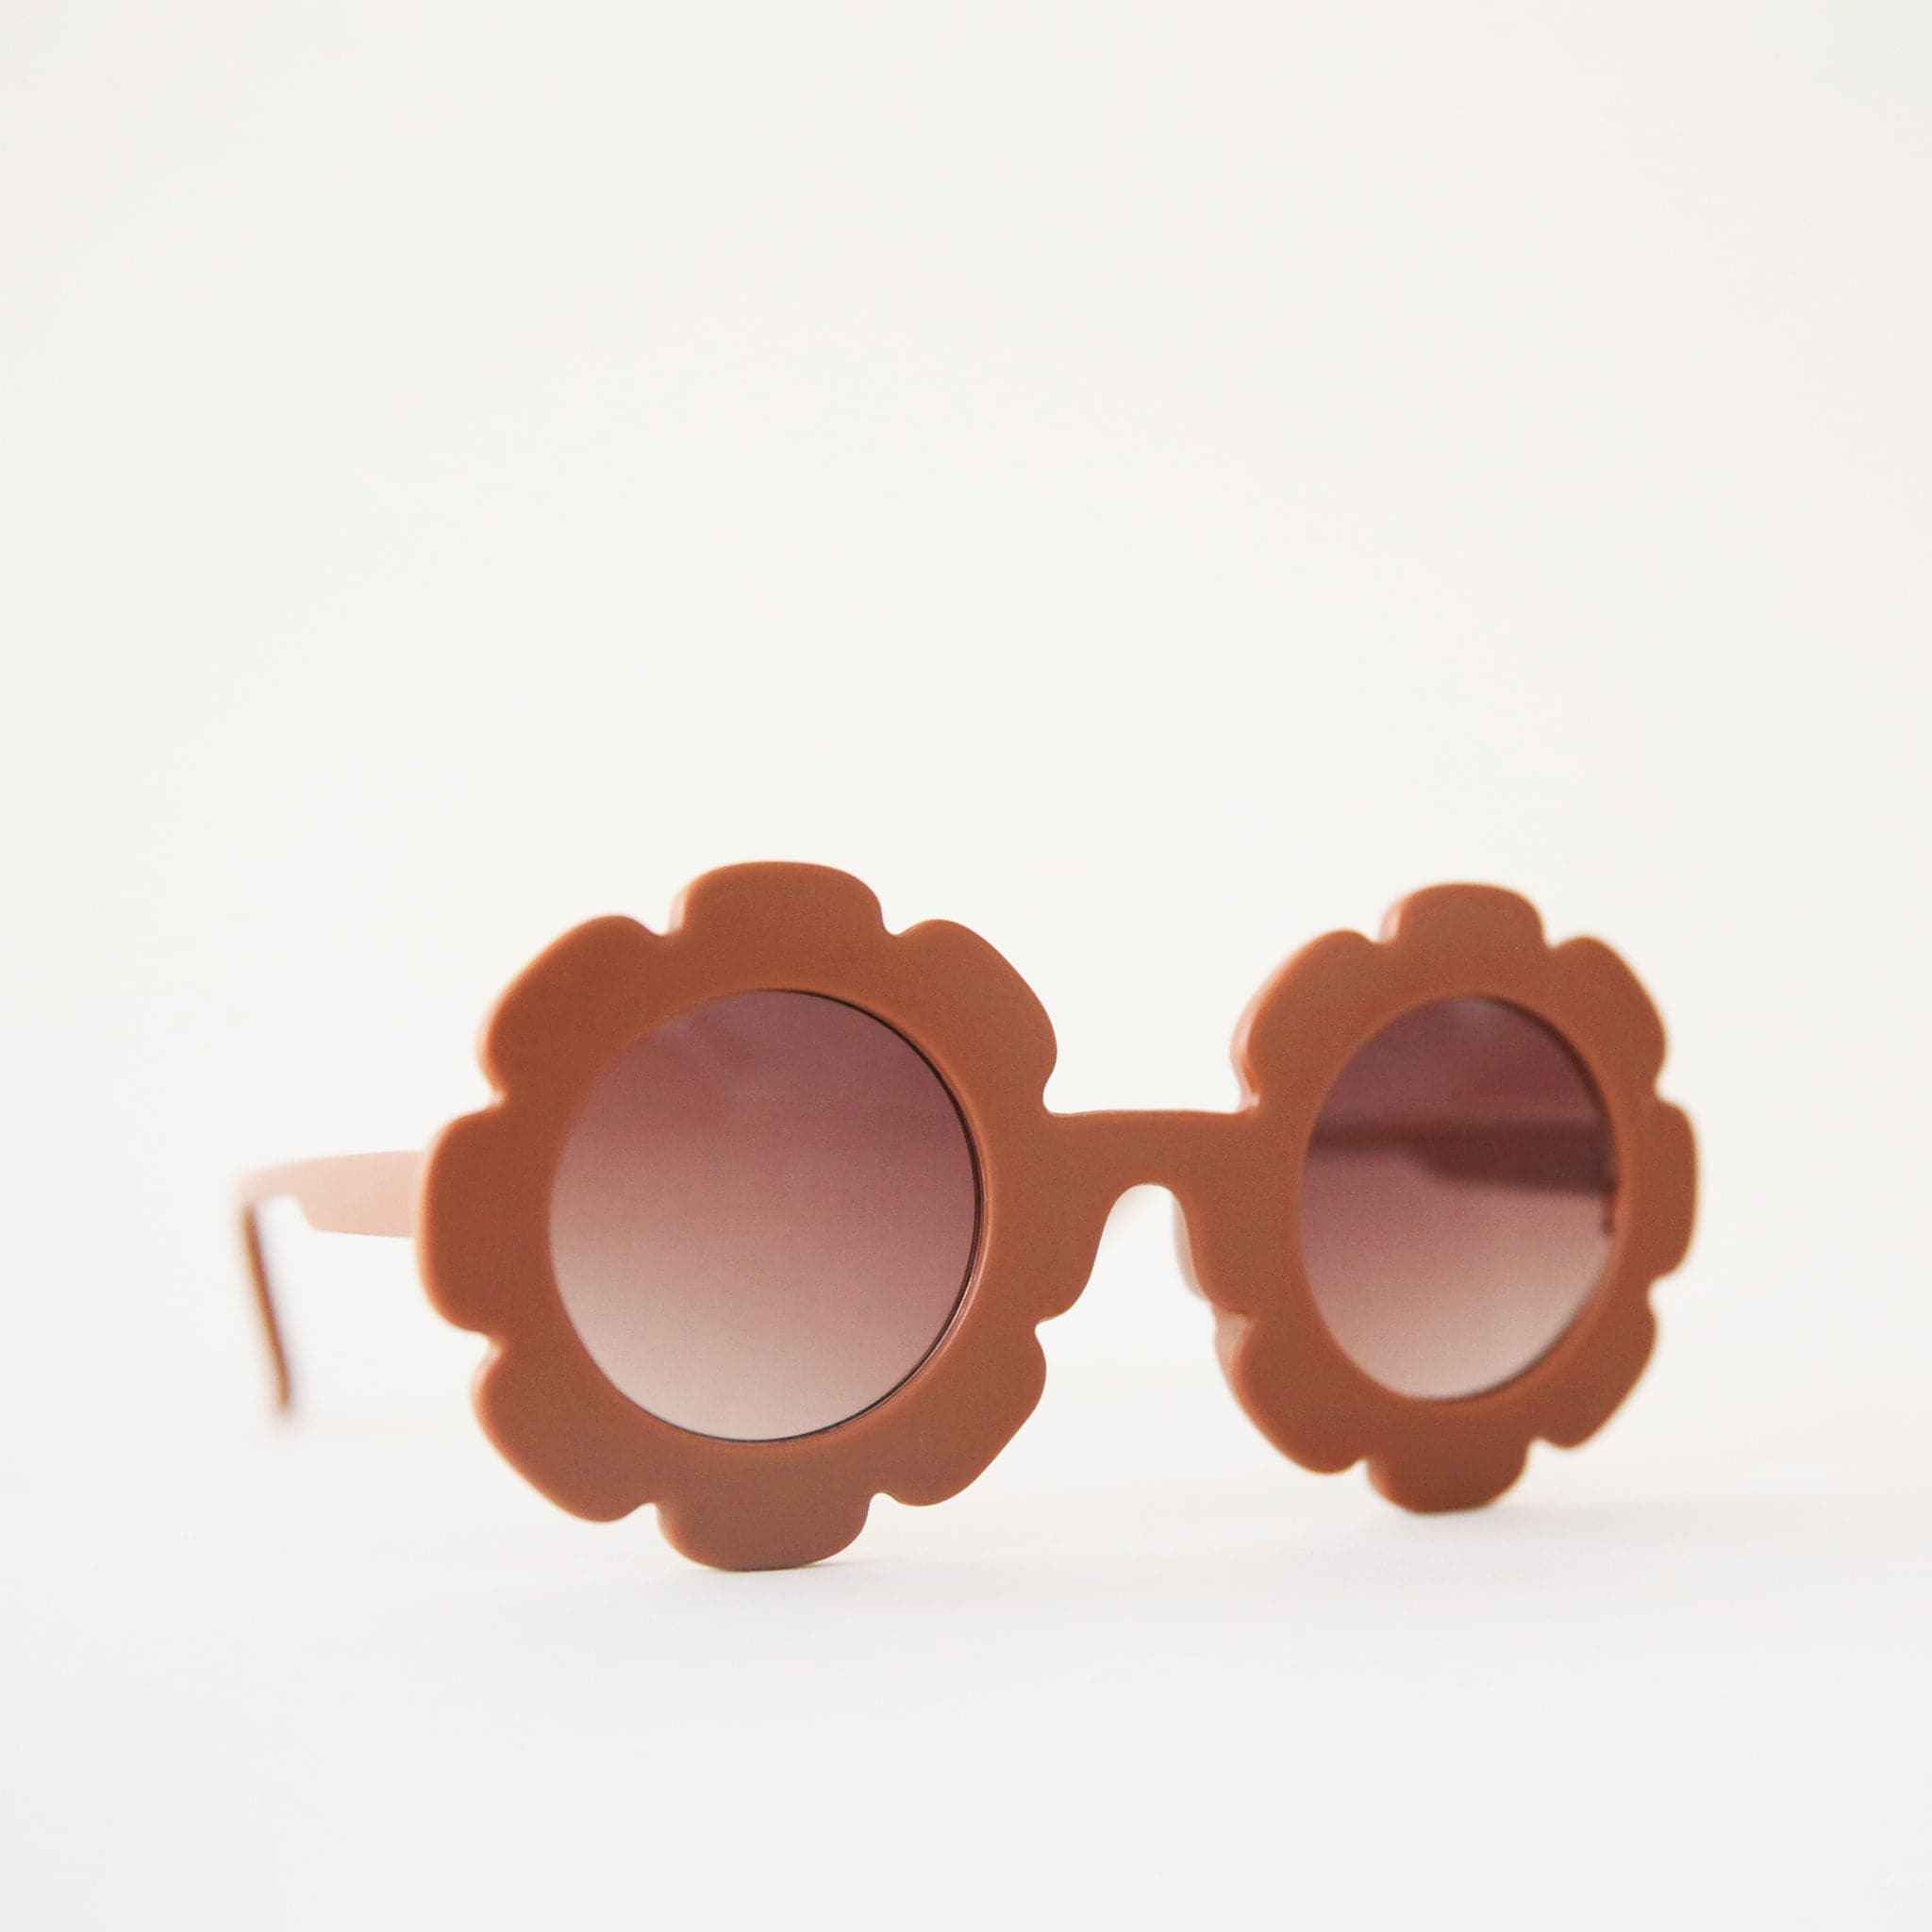 Cognac colored flower shaped sunnies for the little ones.